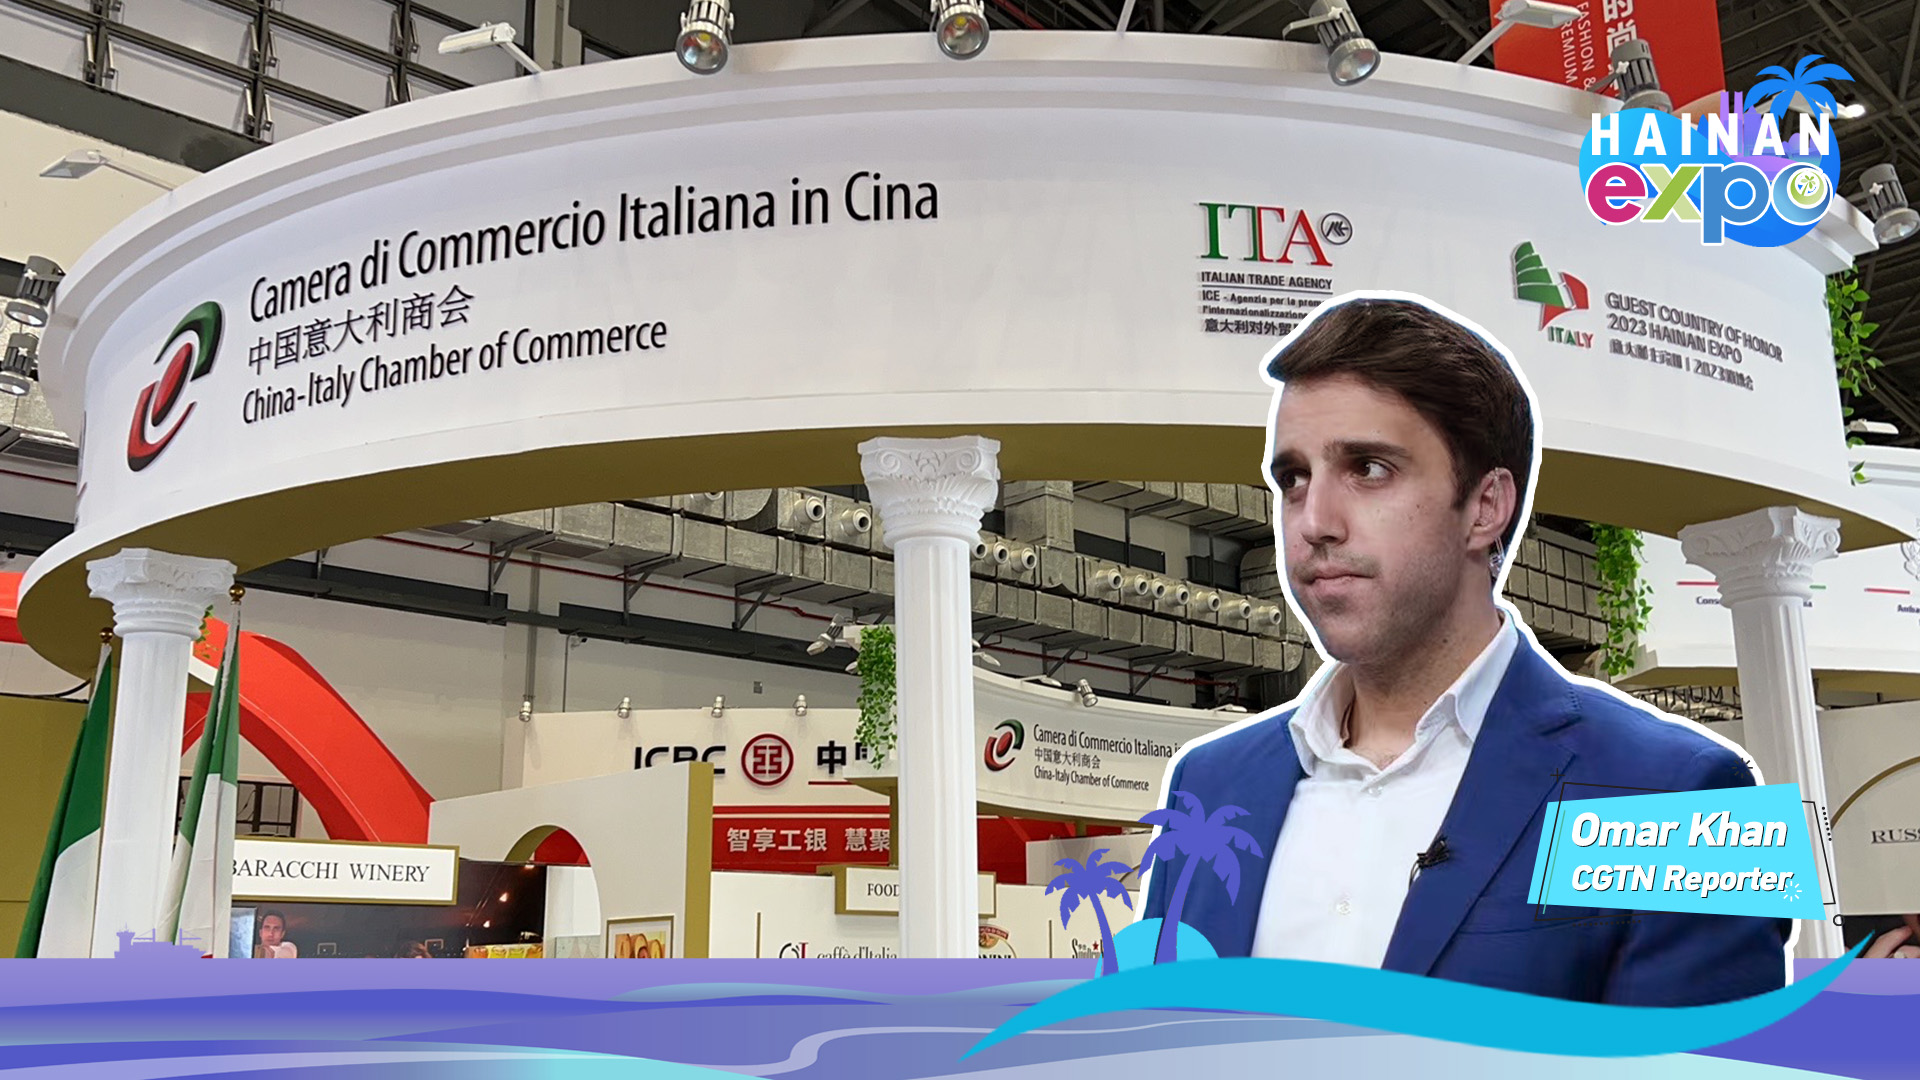 Live: Roundtable Dialogue - At Hainan Expo, Italian entrepreneurs open up on investing in Chinese market